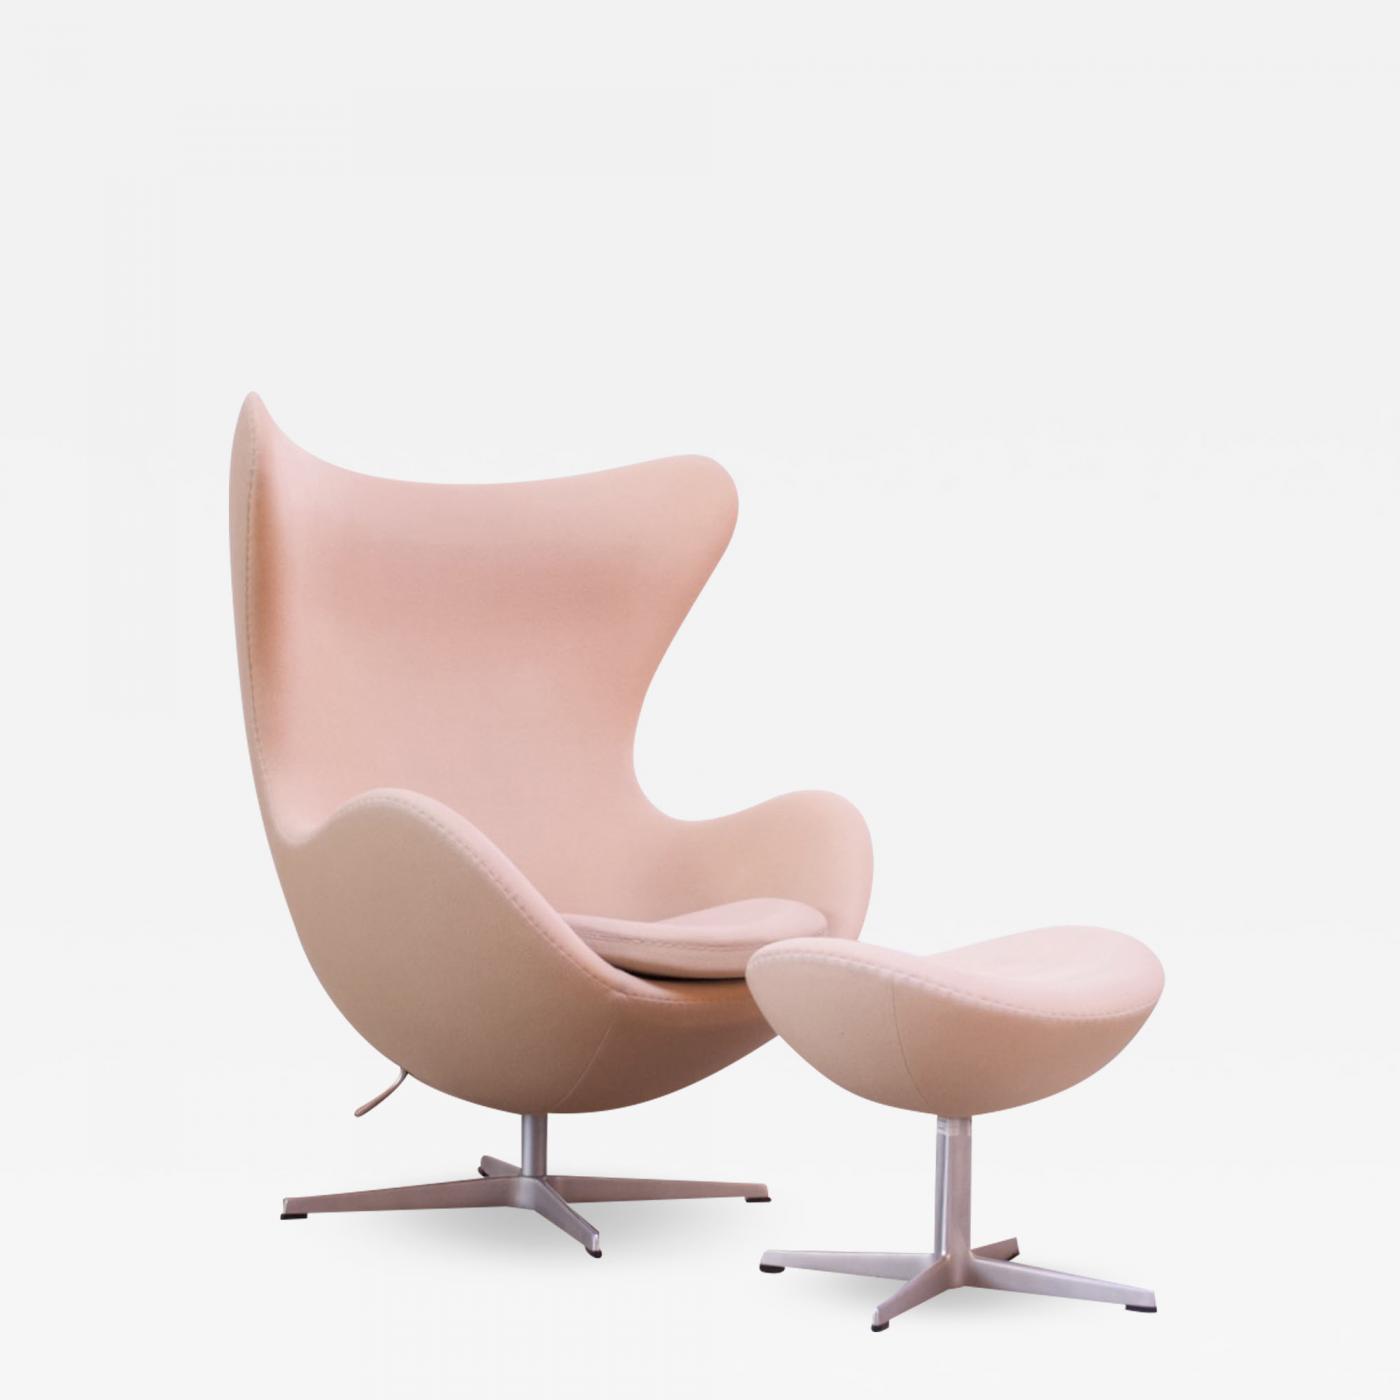 Arne Jacobsen - Arne Jacobsen for Egg Chair and Distributed by Knoll